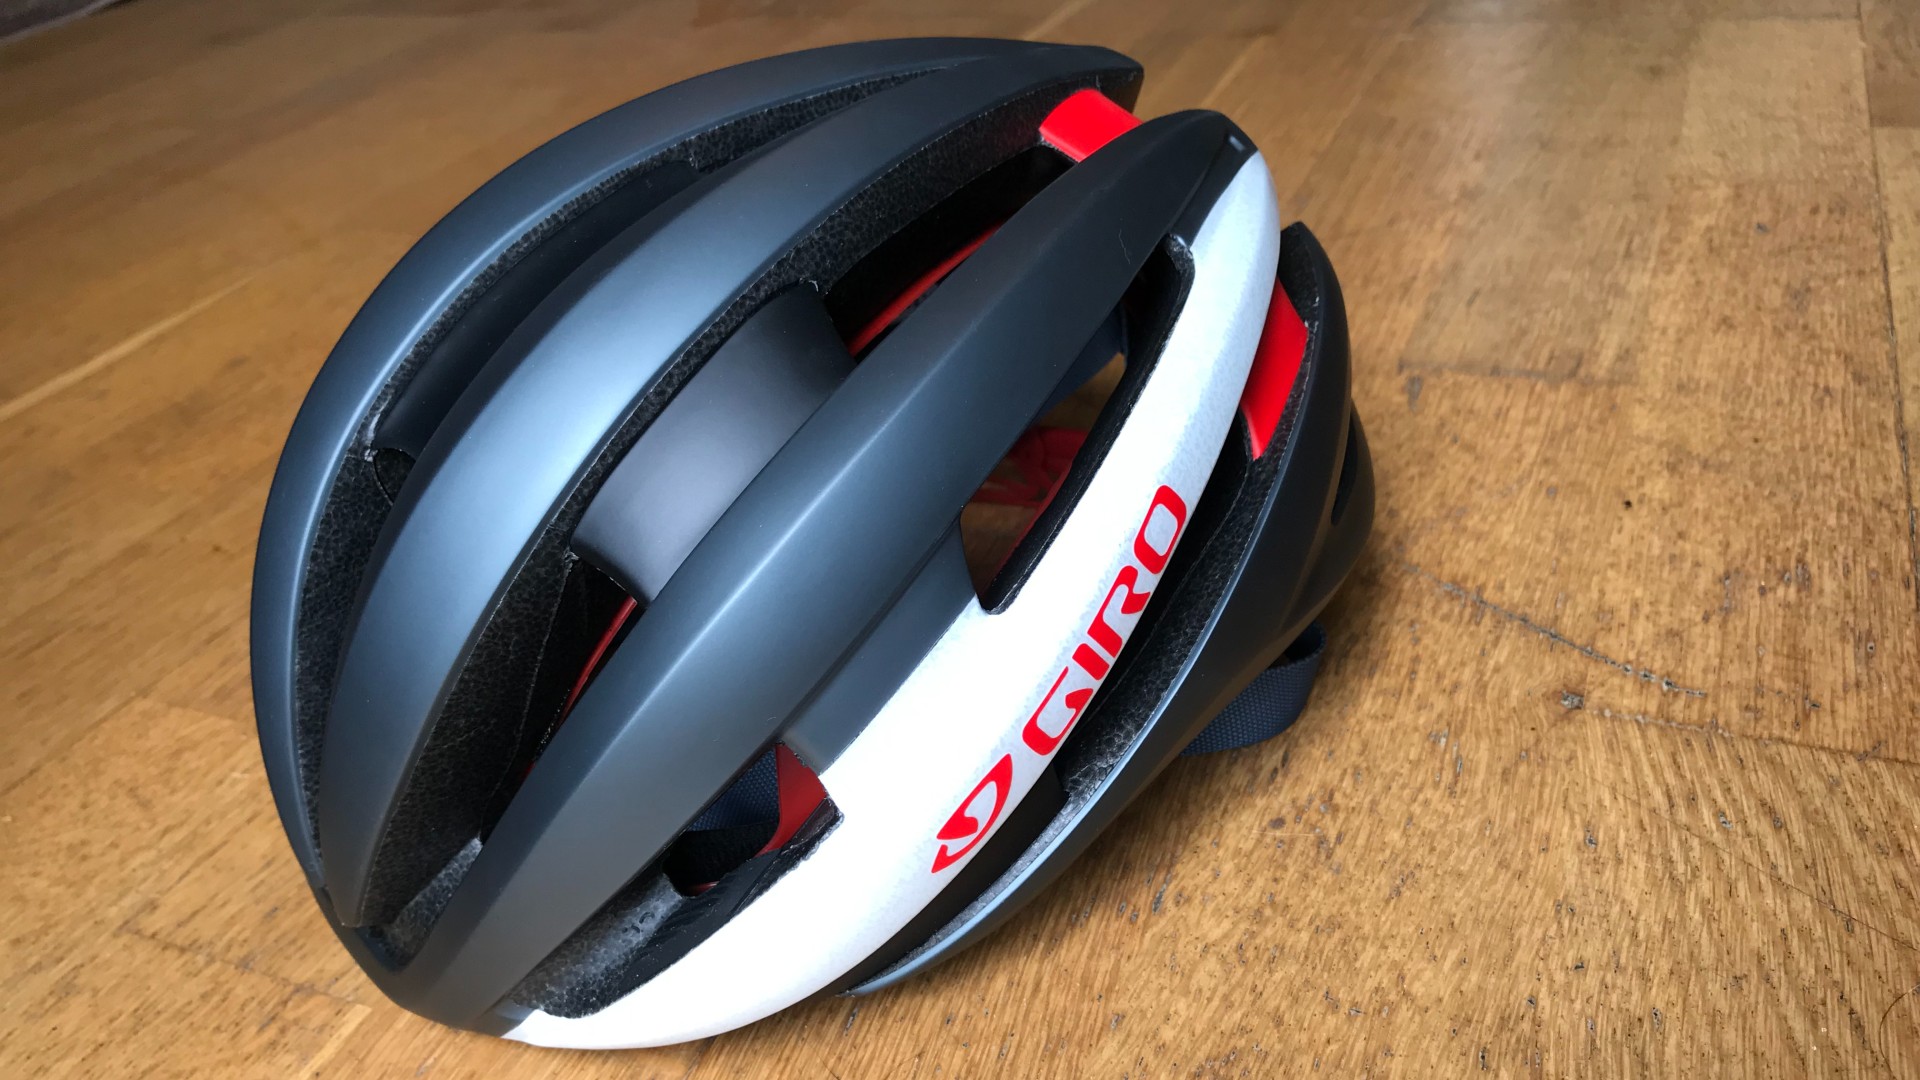 59-63cm ,New Genuine Giro Synthe MIPS Cycling Helmets,Various Model Years,Large 